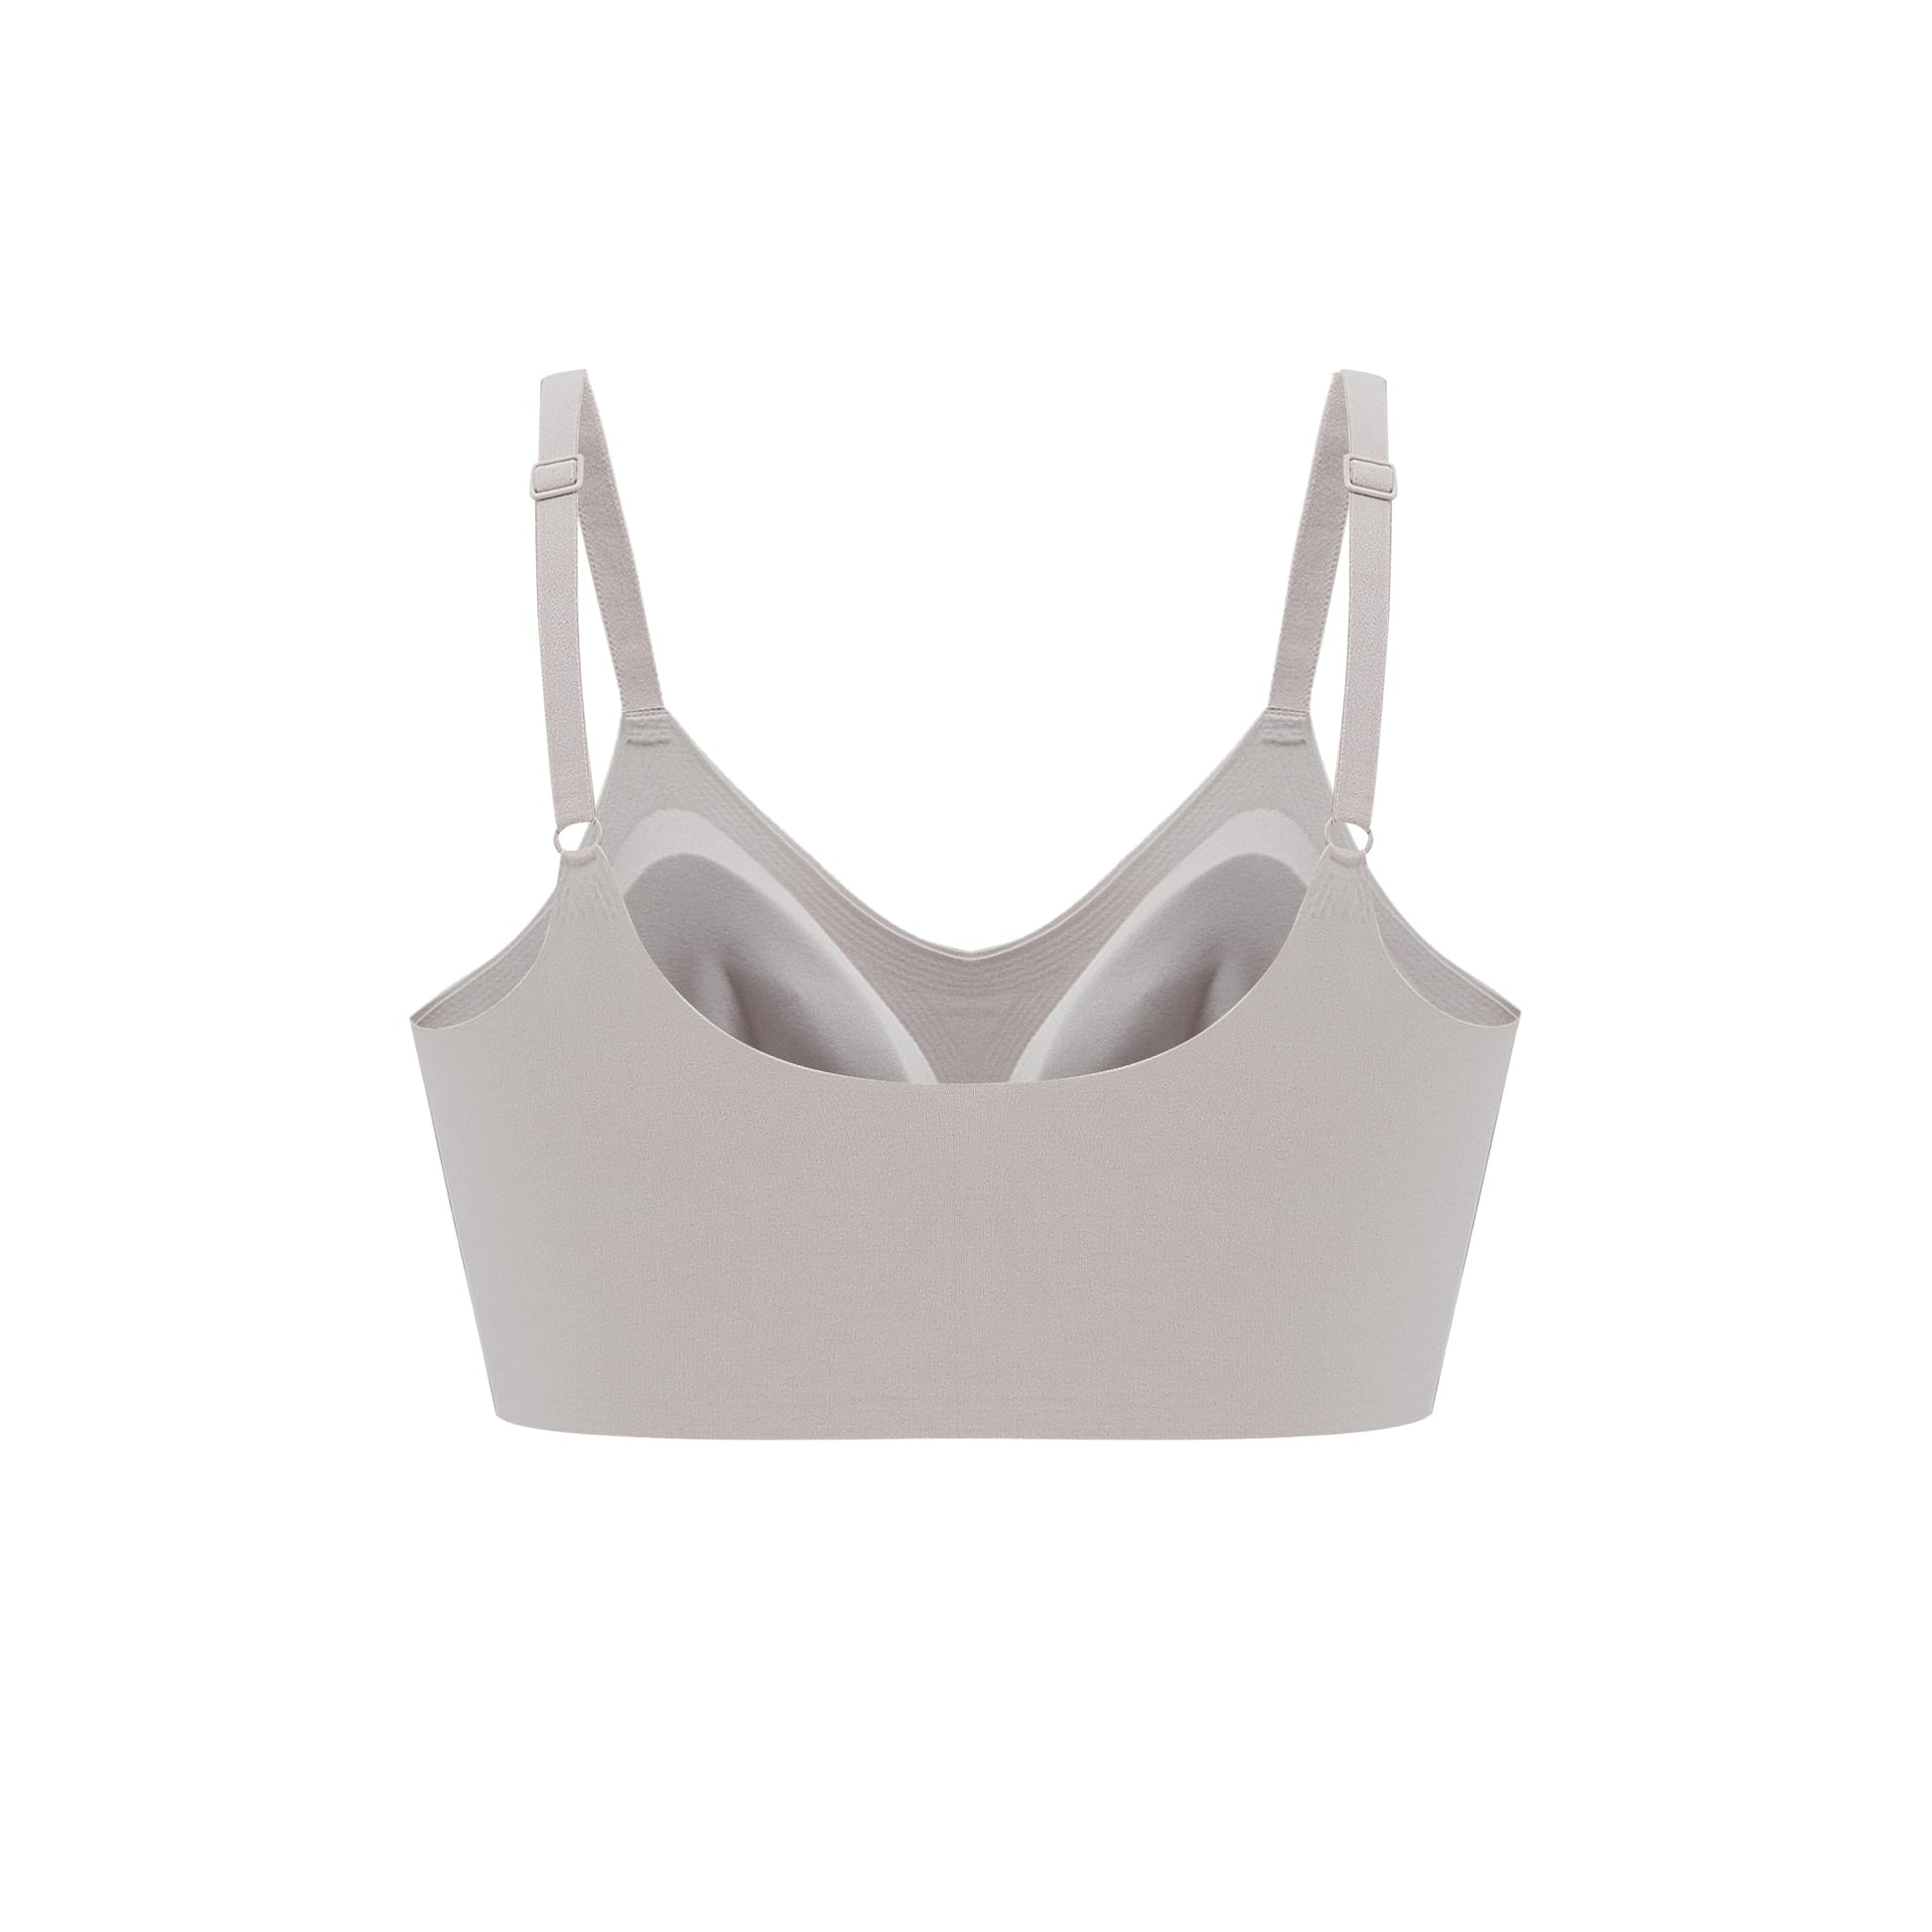 Ribbed Bralette Tank - Heather Grey - Chérie Amour